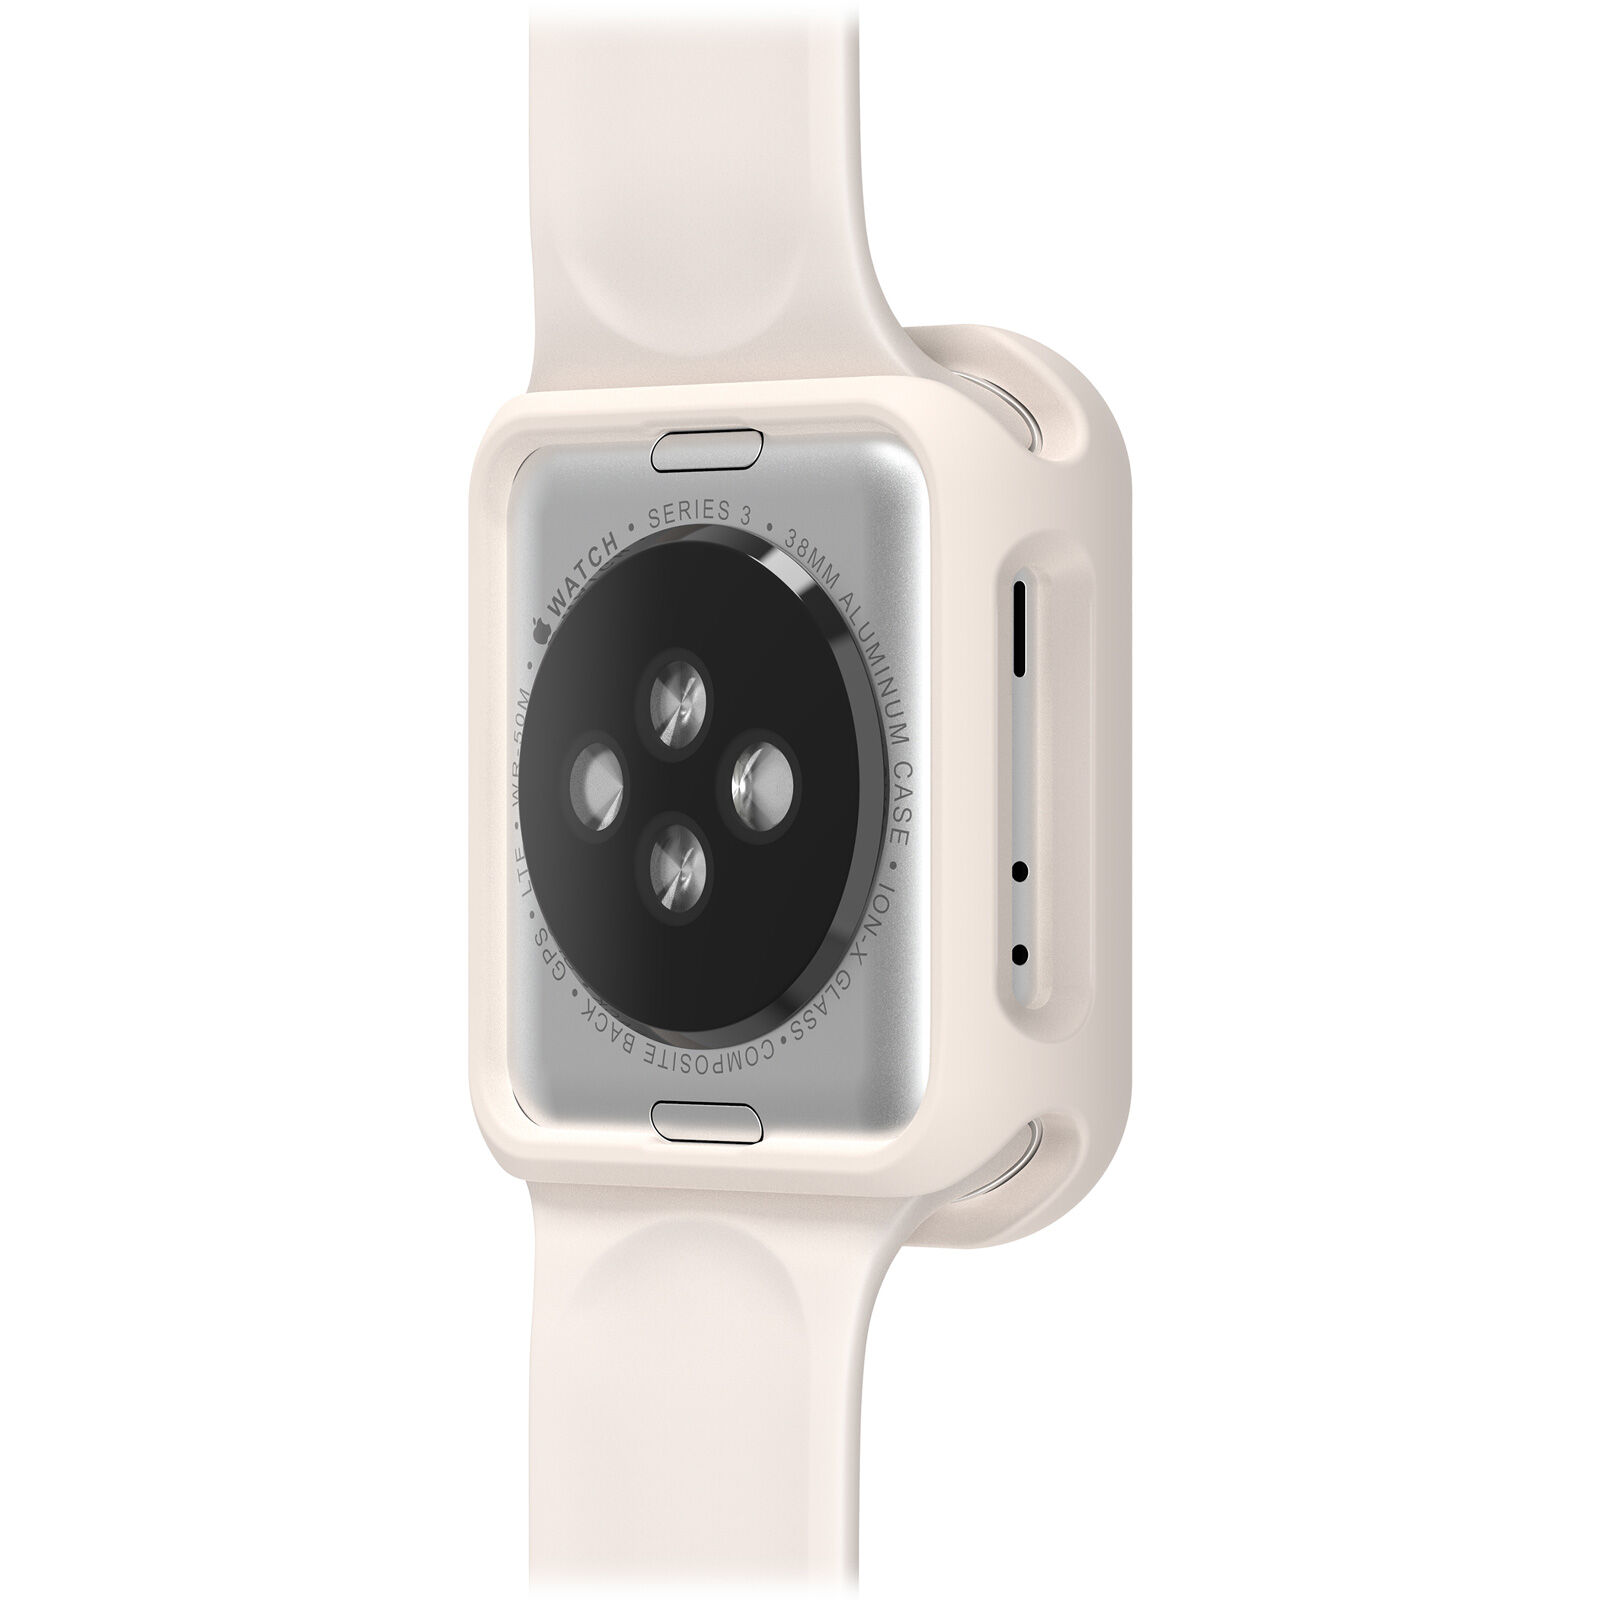 Beige Protective Apple Watch Series 3 38mm Case |OtterBox